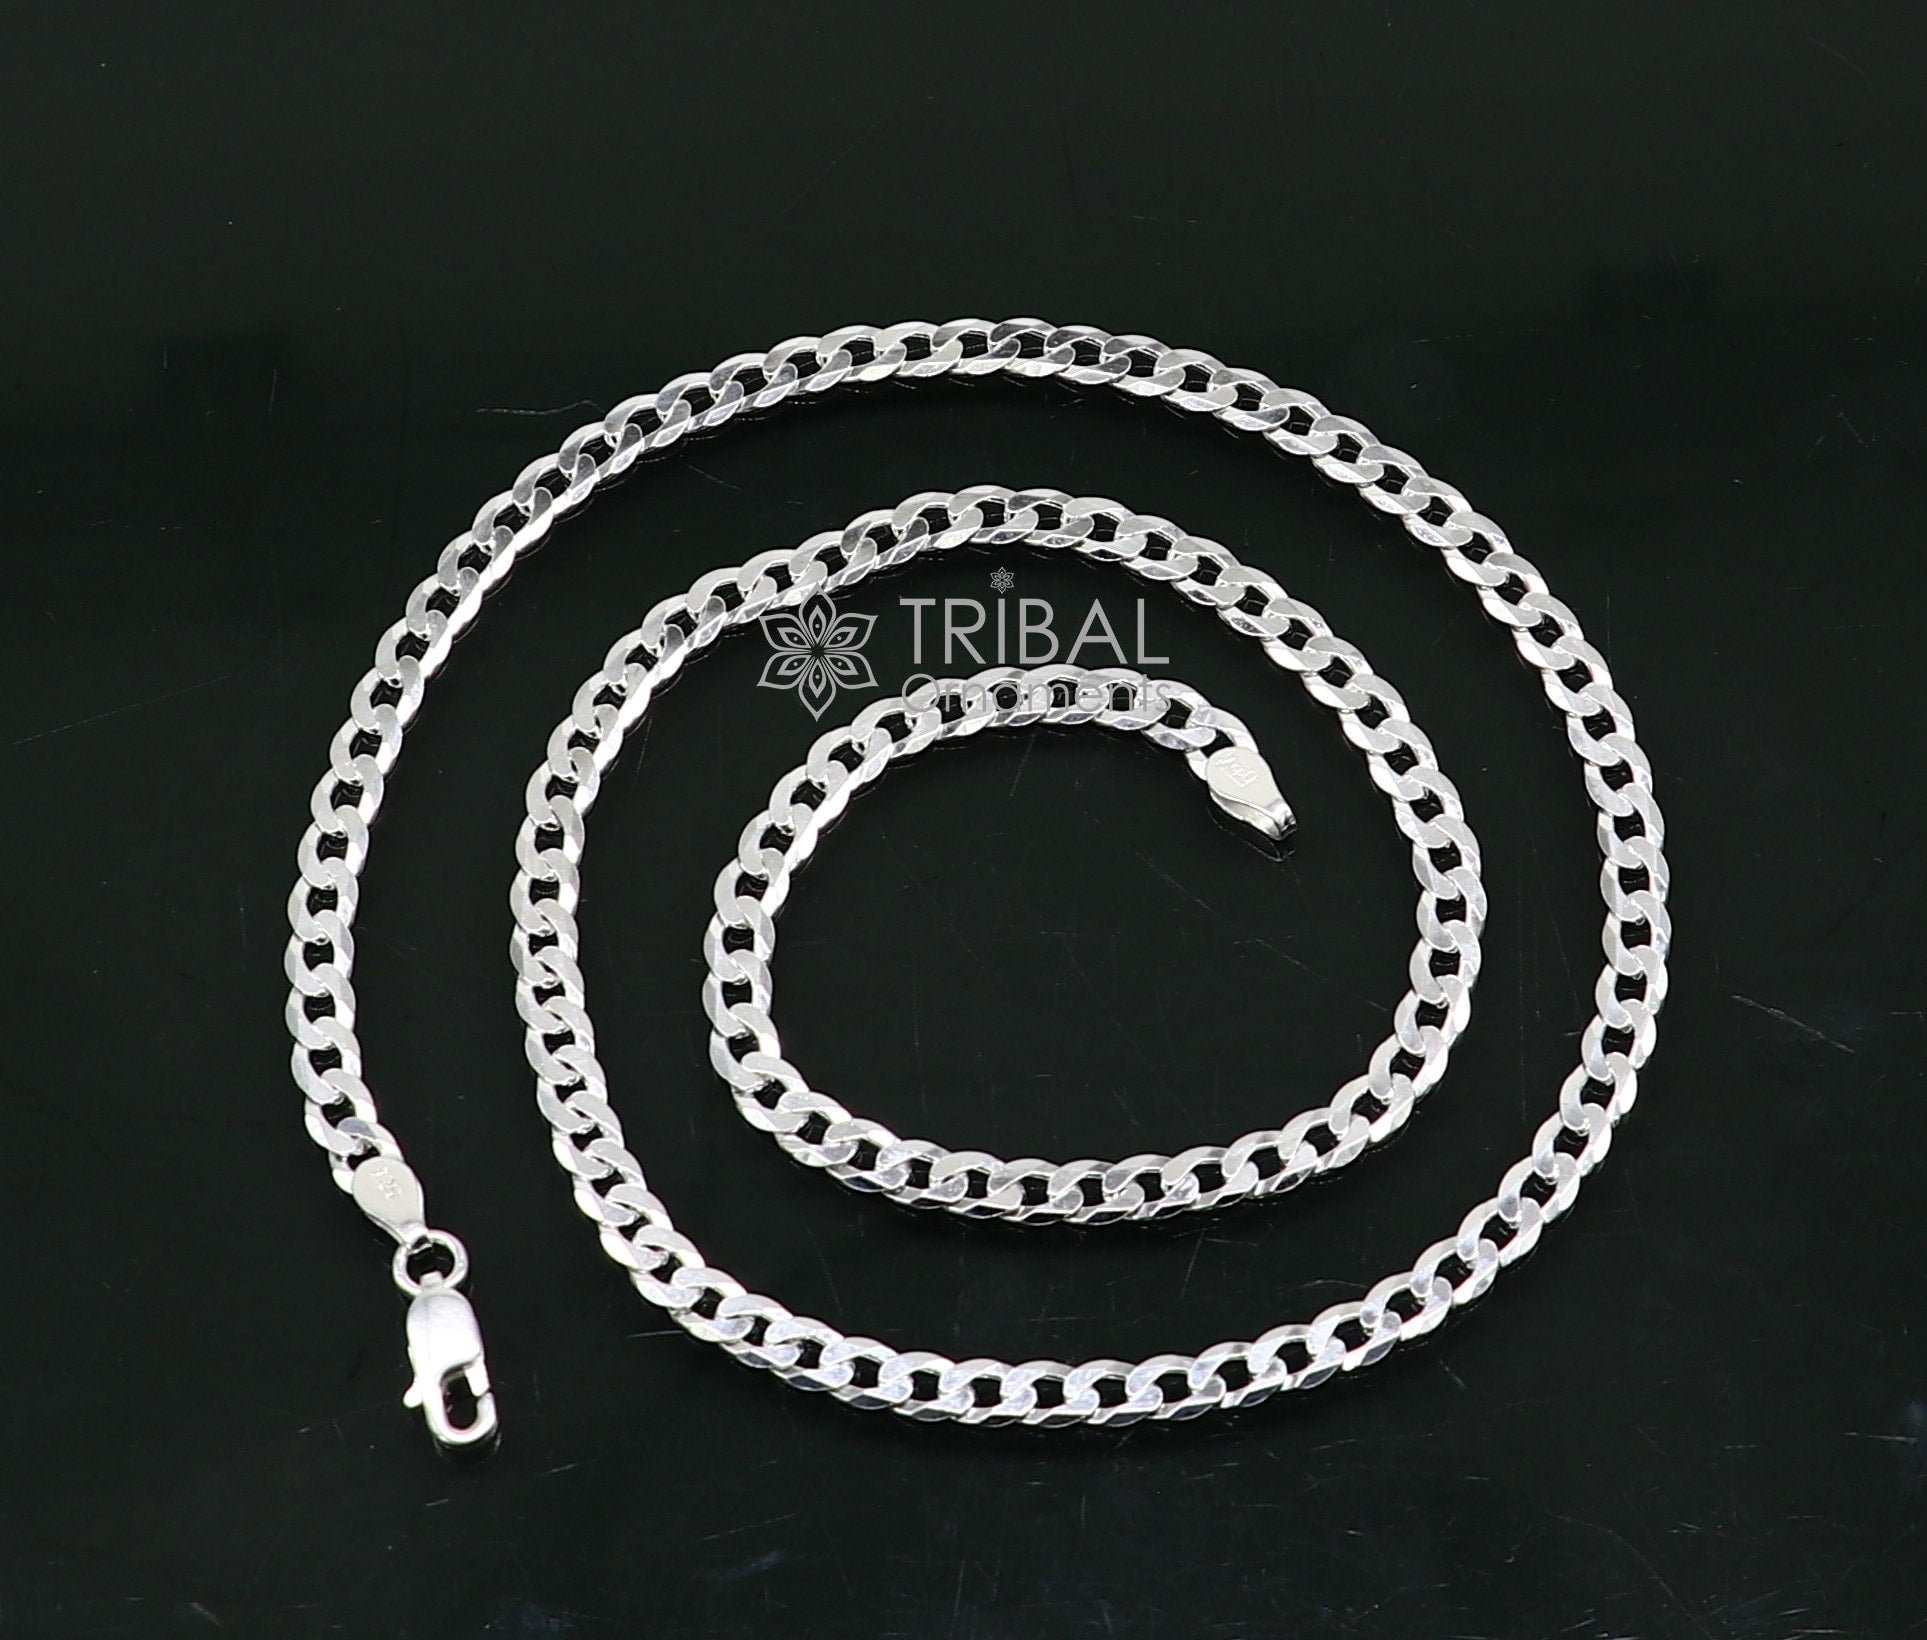 4mm 20" solid 925 sterling silver handmade modern trendy design wheat chain necklace giving it a distinctive and stylish look ch249 - TRIBAL ORNAMENTS